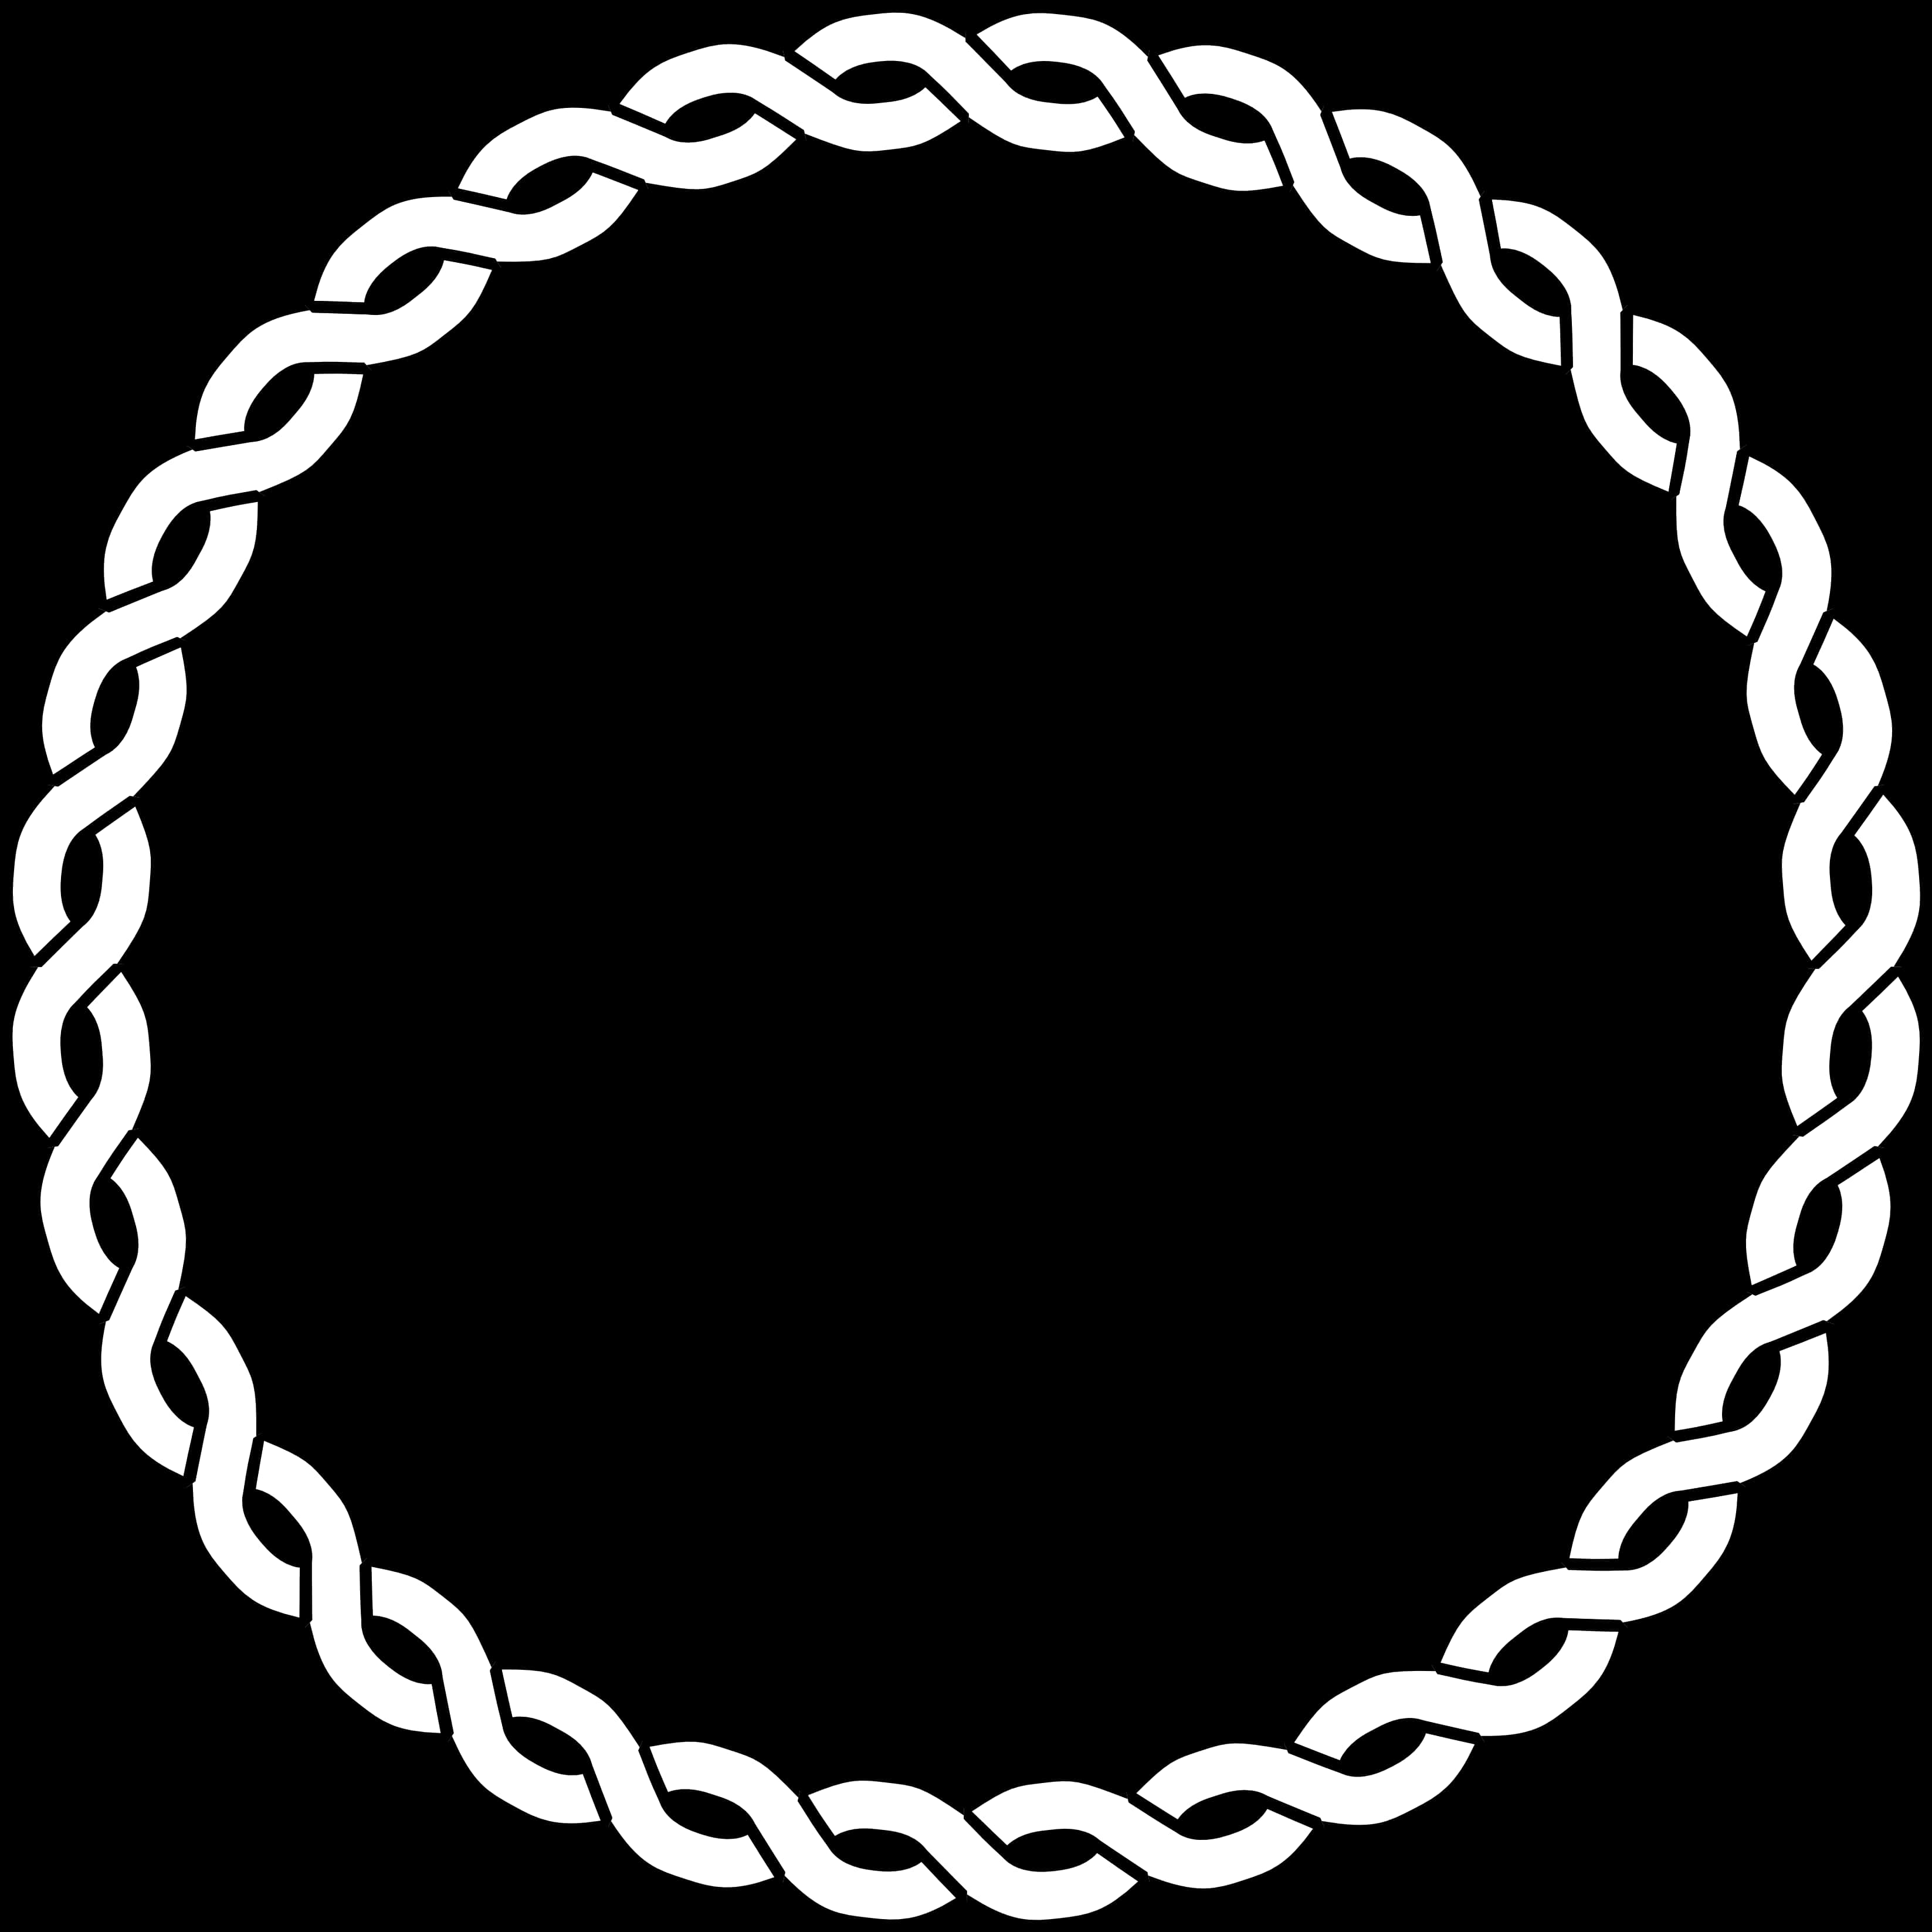 White Chain Circle Graphic PNG